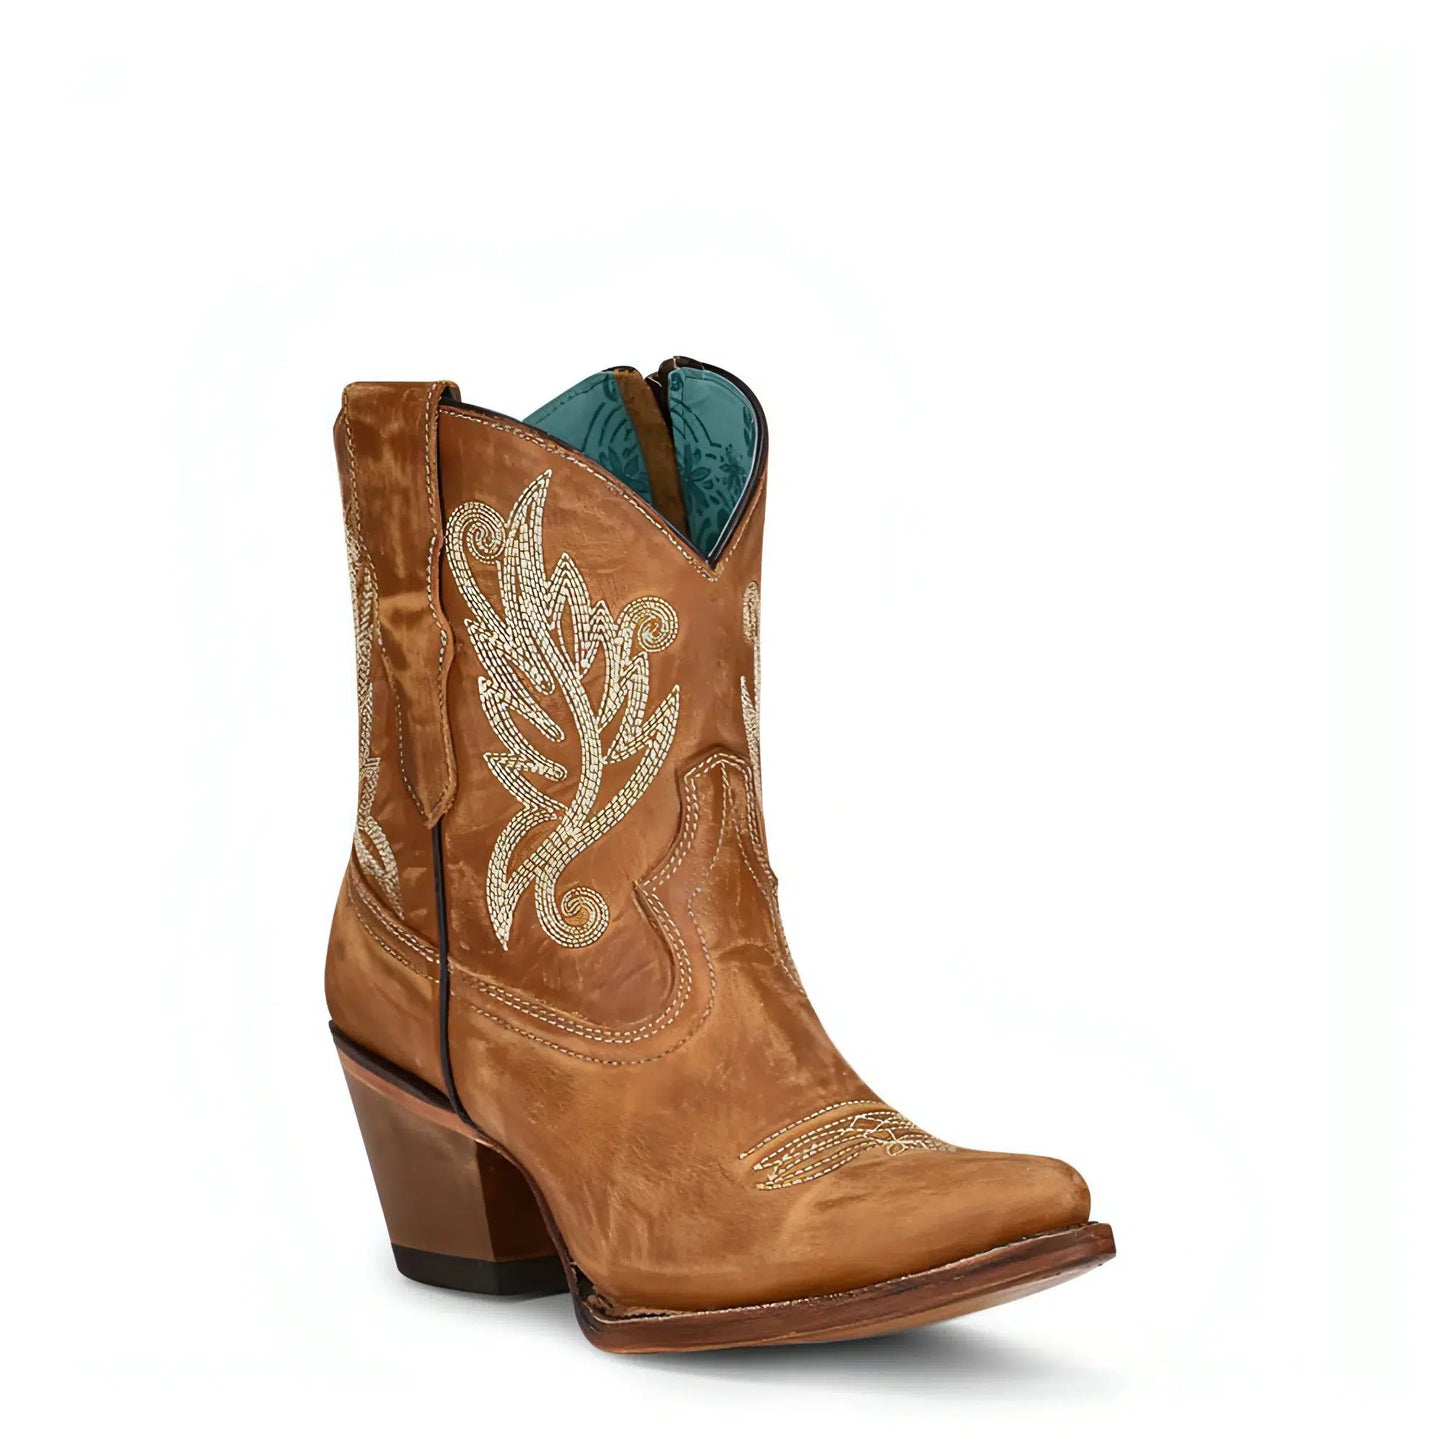 A4218 - M Corral brown western cowgirl cowhide leather ankle  boots for women